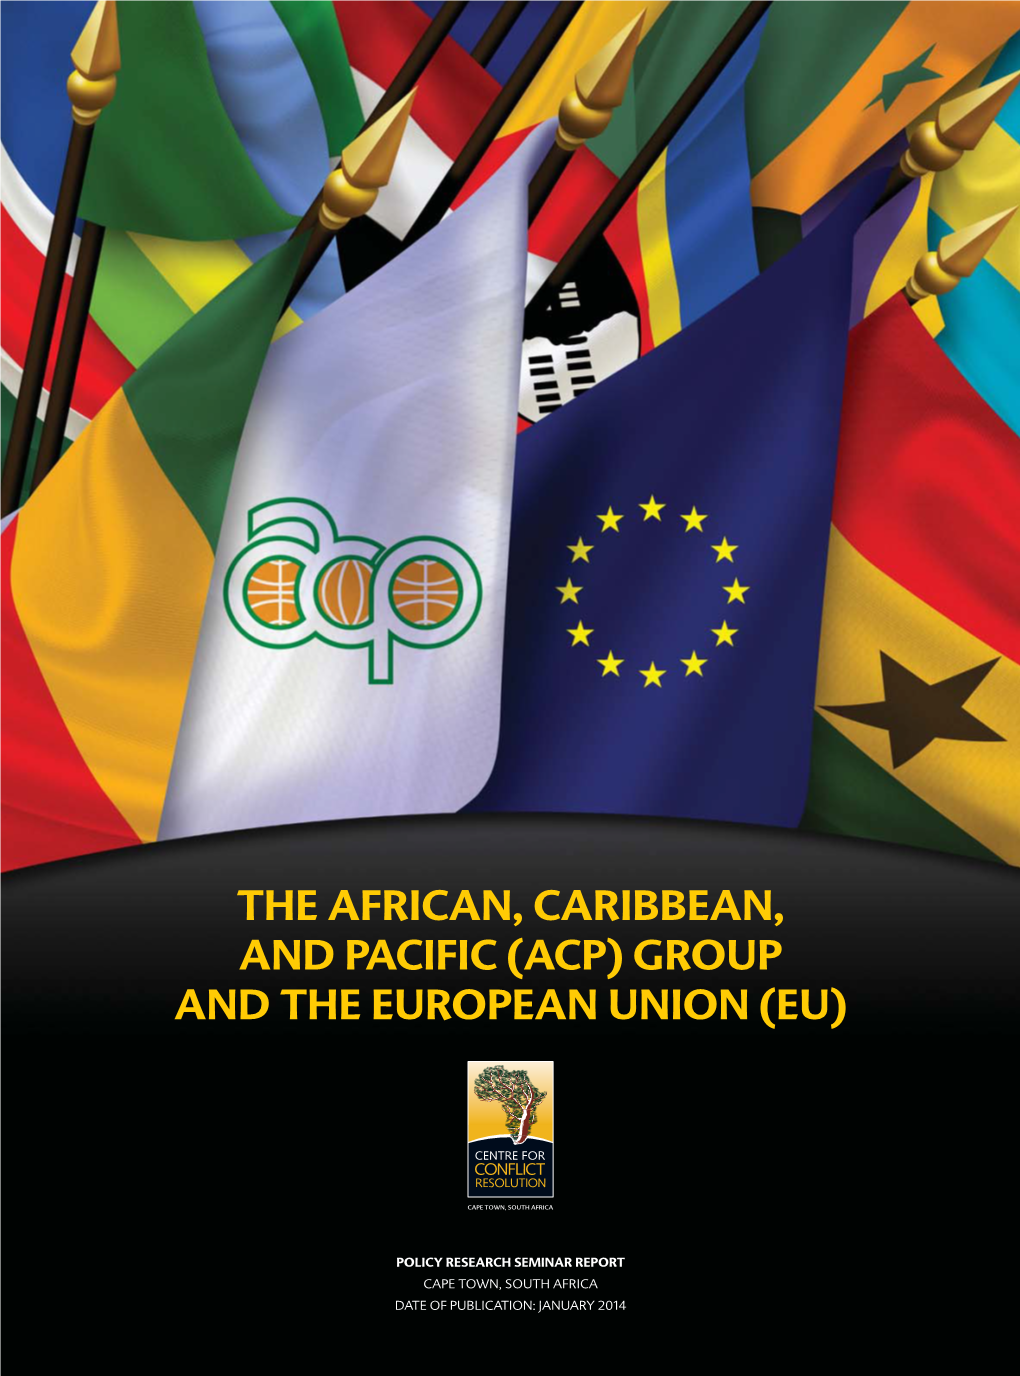 The African, Caribbean, and Pacific (Acp) Group and the European Union (Eu)